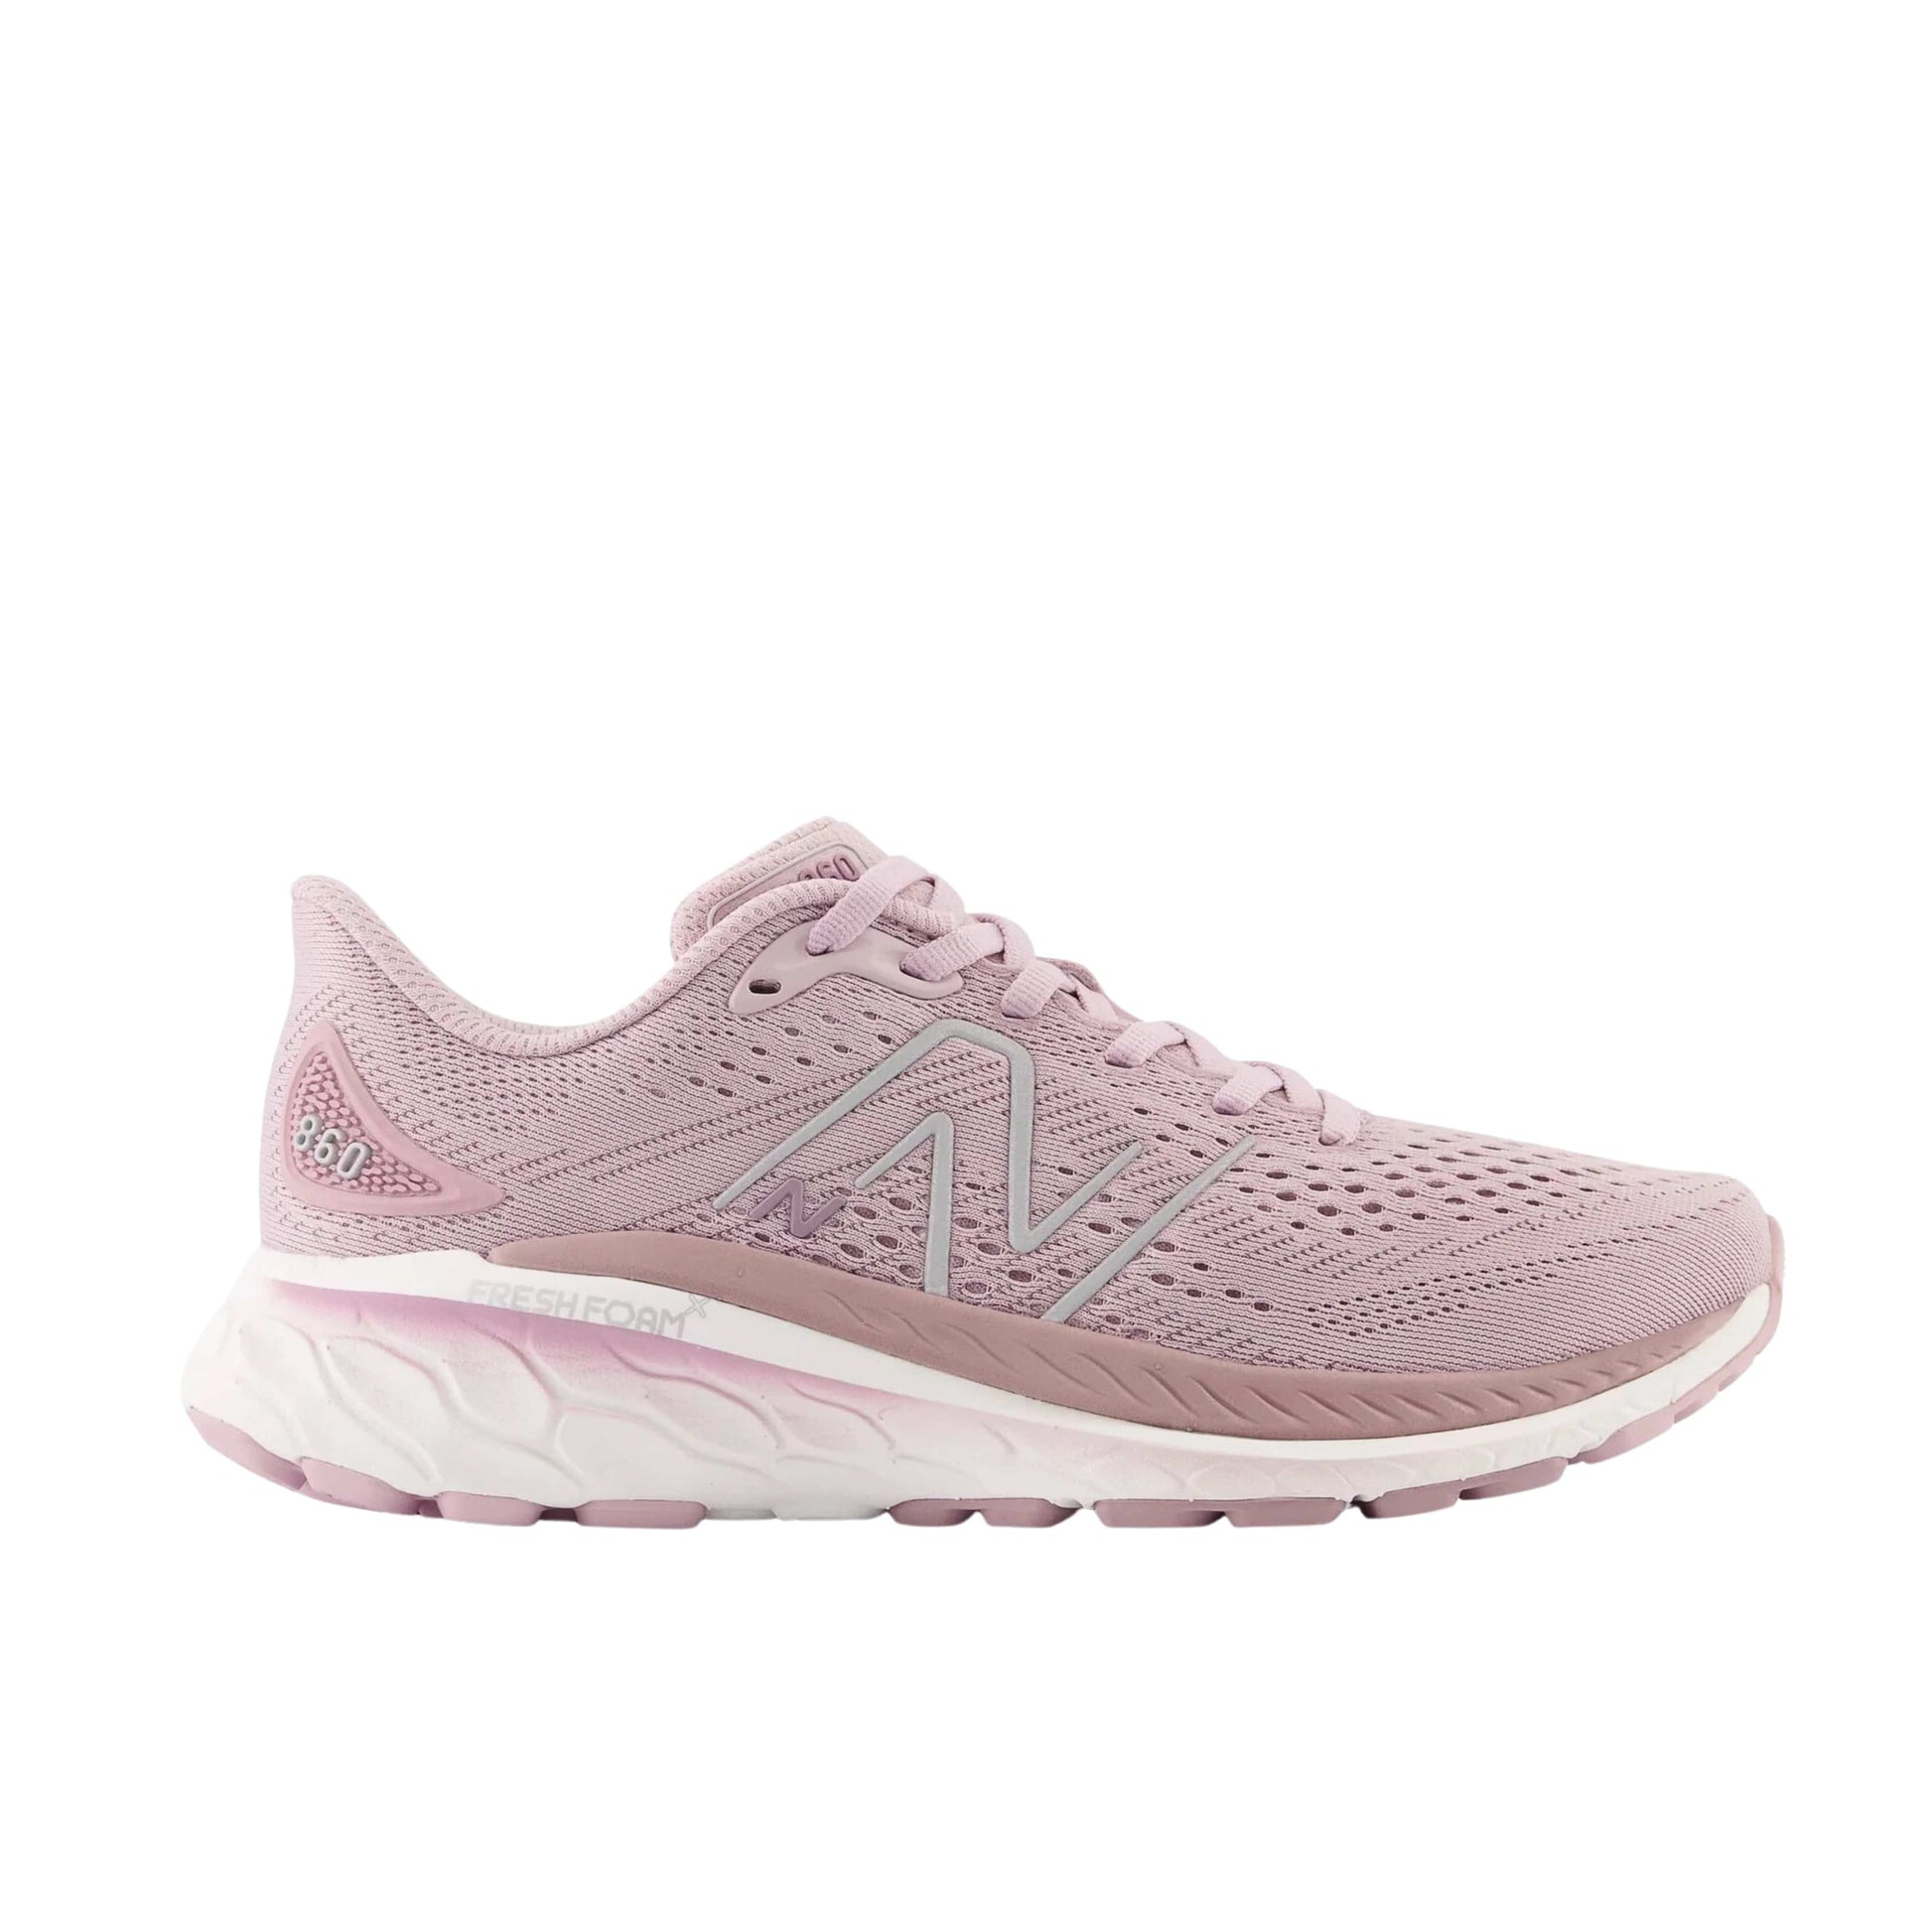 NEW BALANCE Athletic Shoes 39 / Purple NEW BALANCE - Sneakers Shoes With Lace-Up